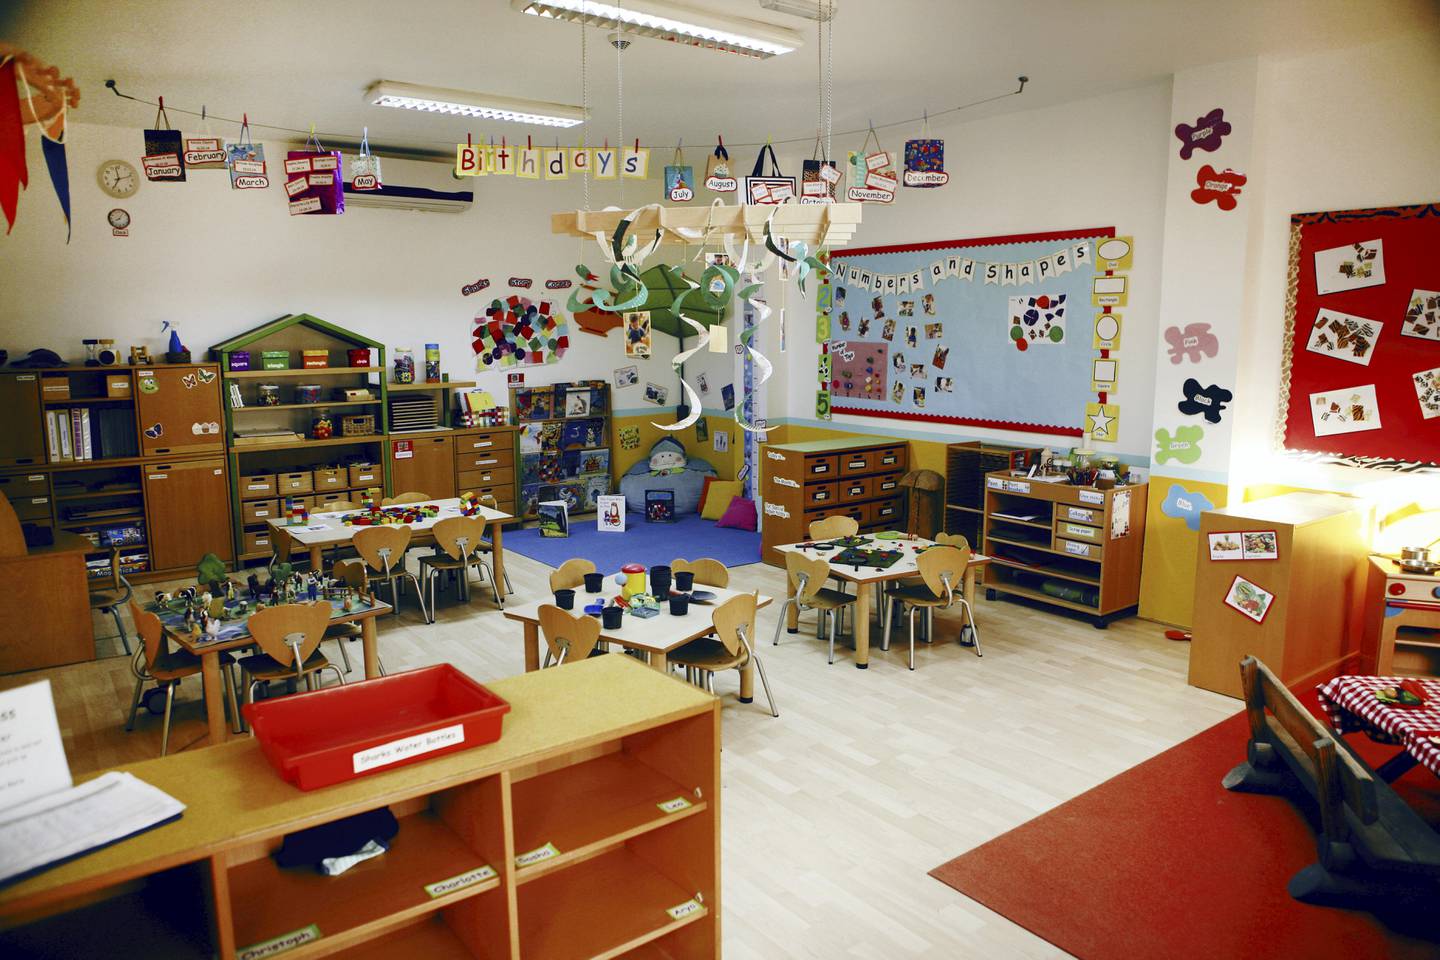 The classrooms are a veritable treasure trove of playthings